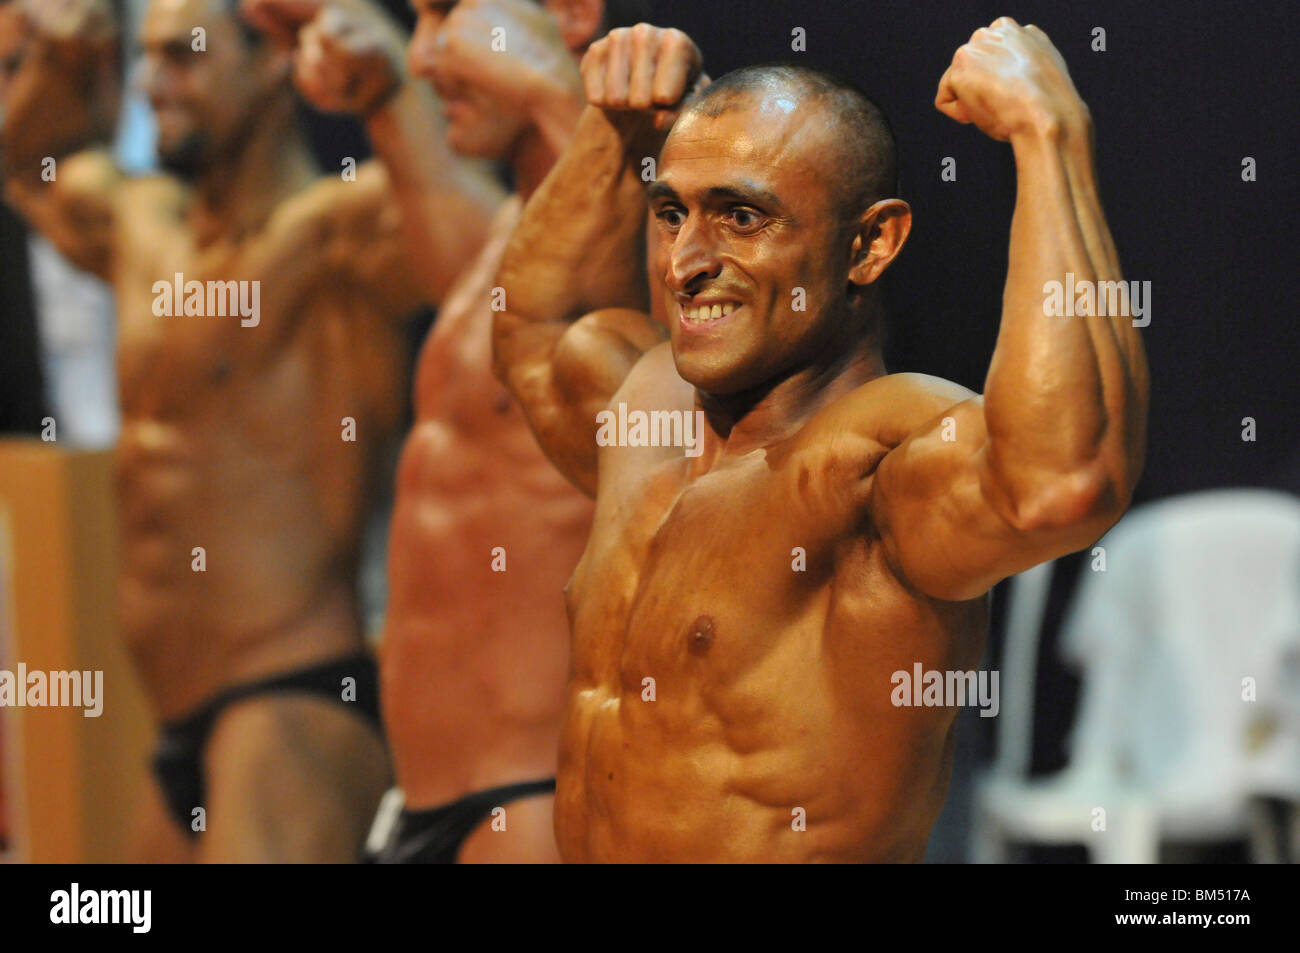 Israel, regional Bodybuilding competition Stock Photo